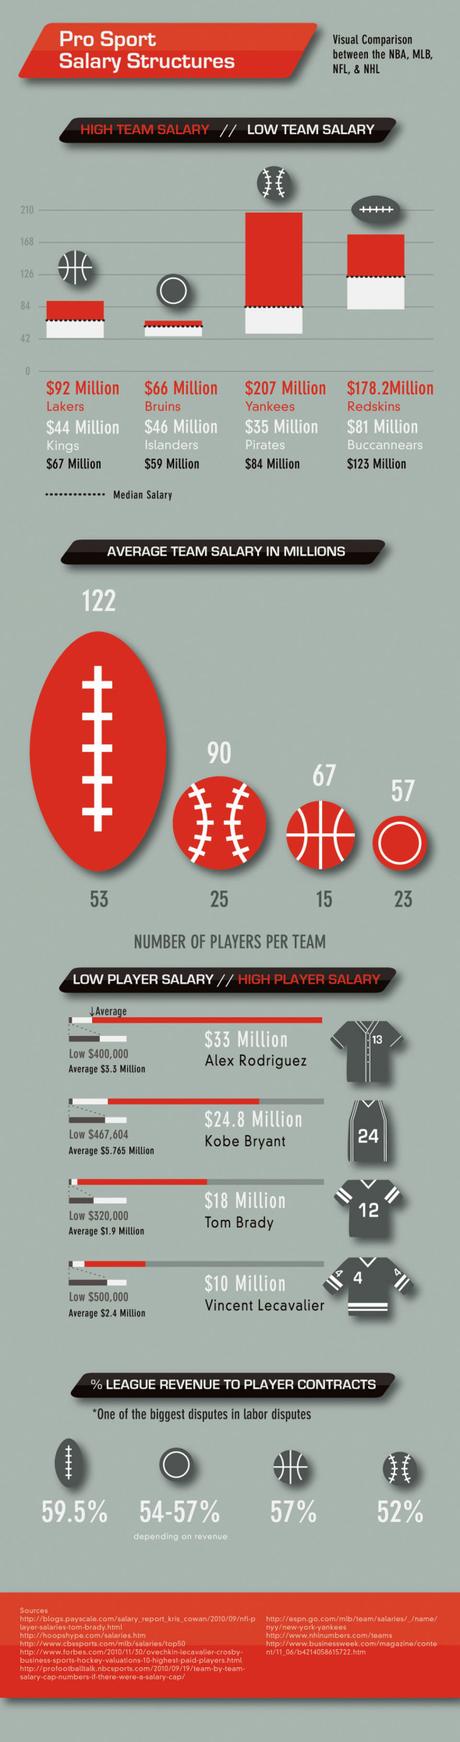 Infographic: Pro Sport Salary Structures